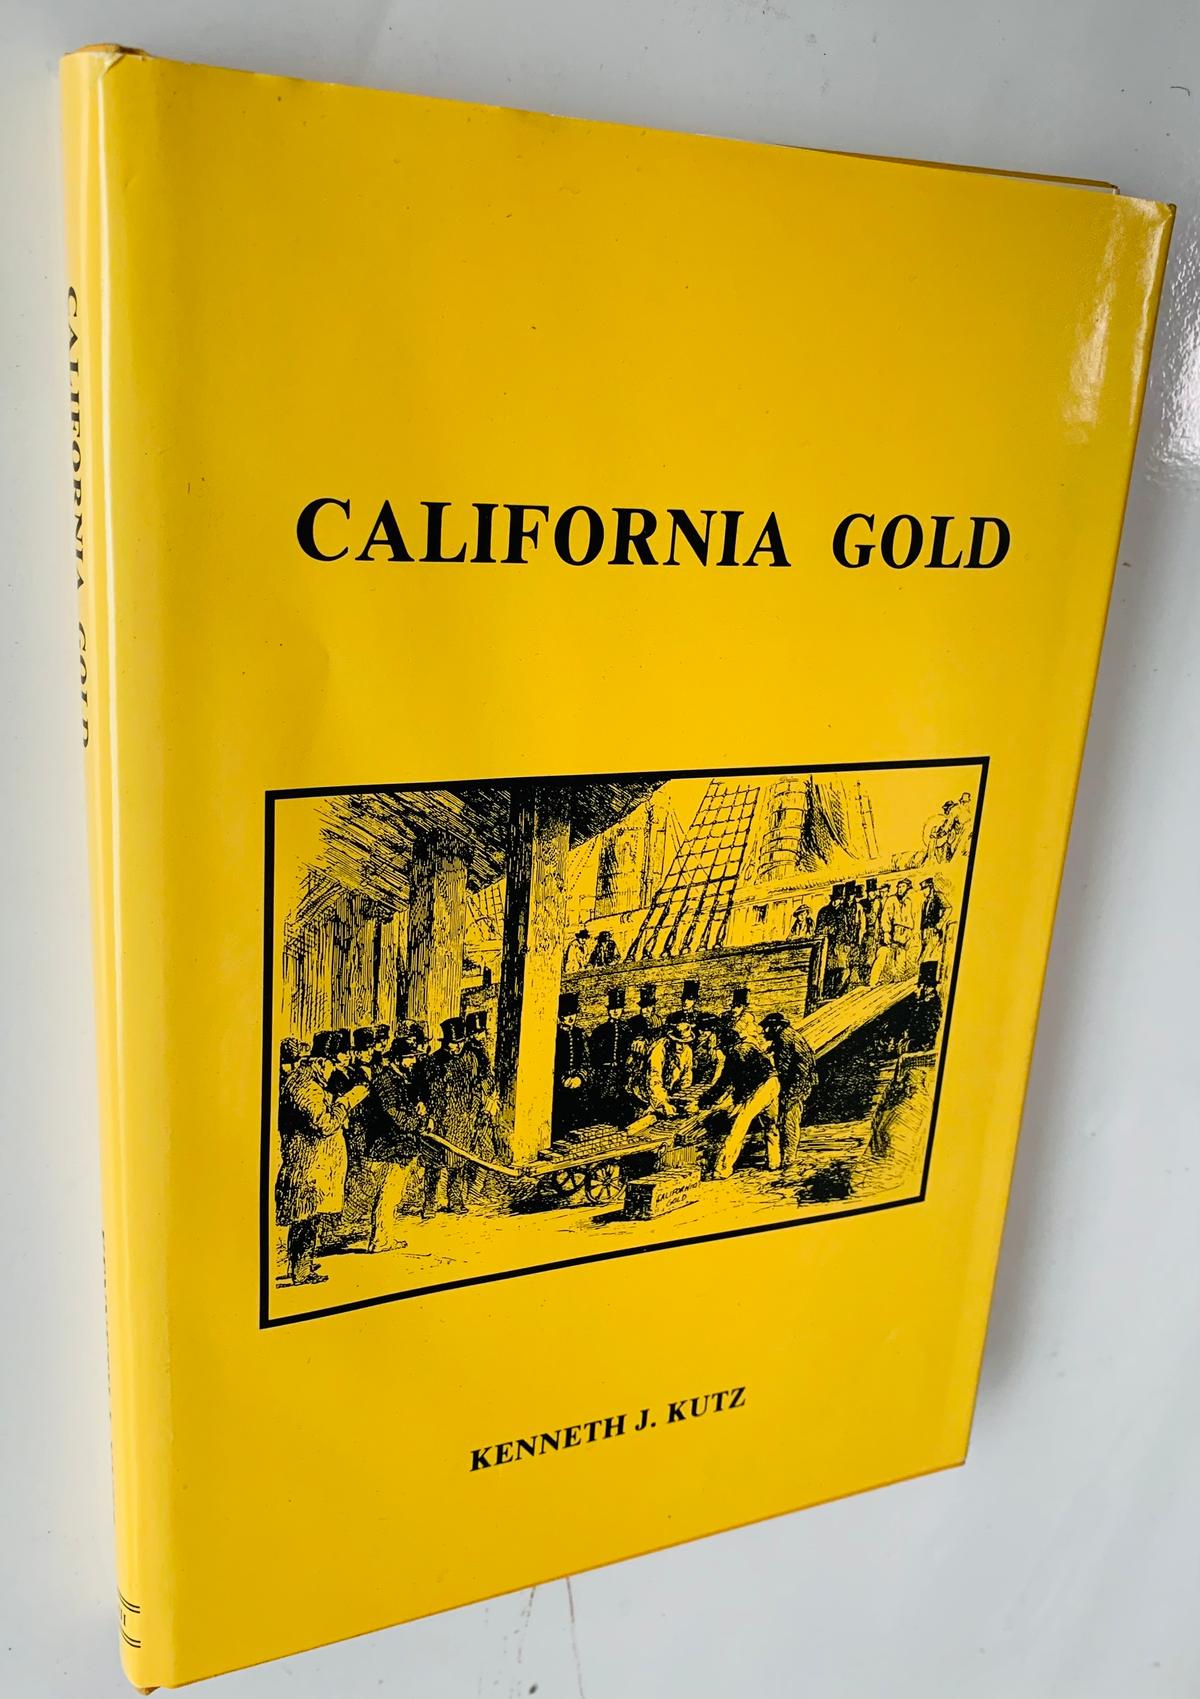 California Gold Personal Experiences of the "Diggers" on the Gold Fields 1848-1868 PRIVATE PRINTED